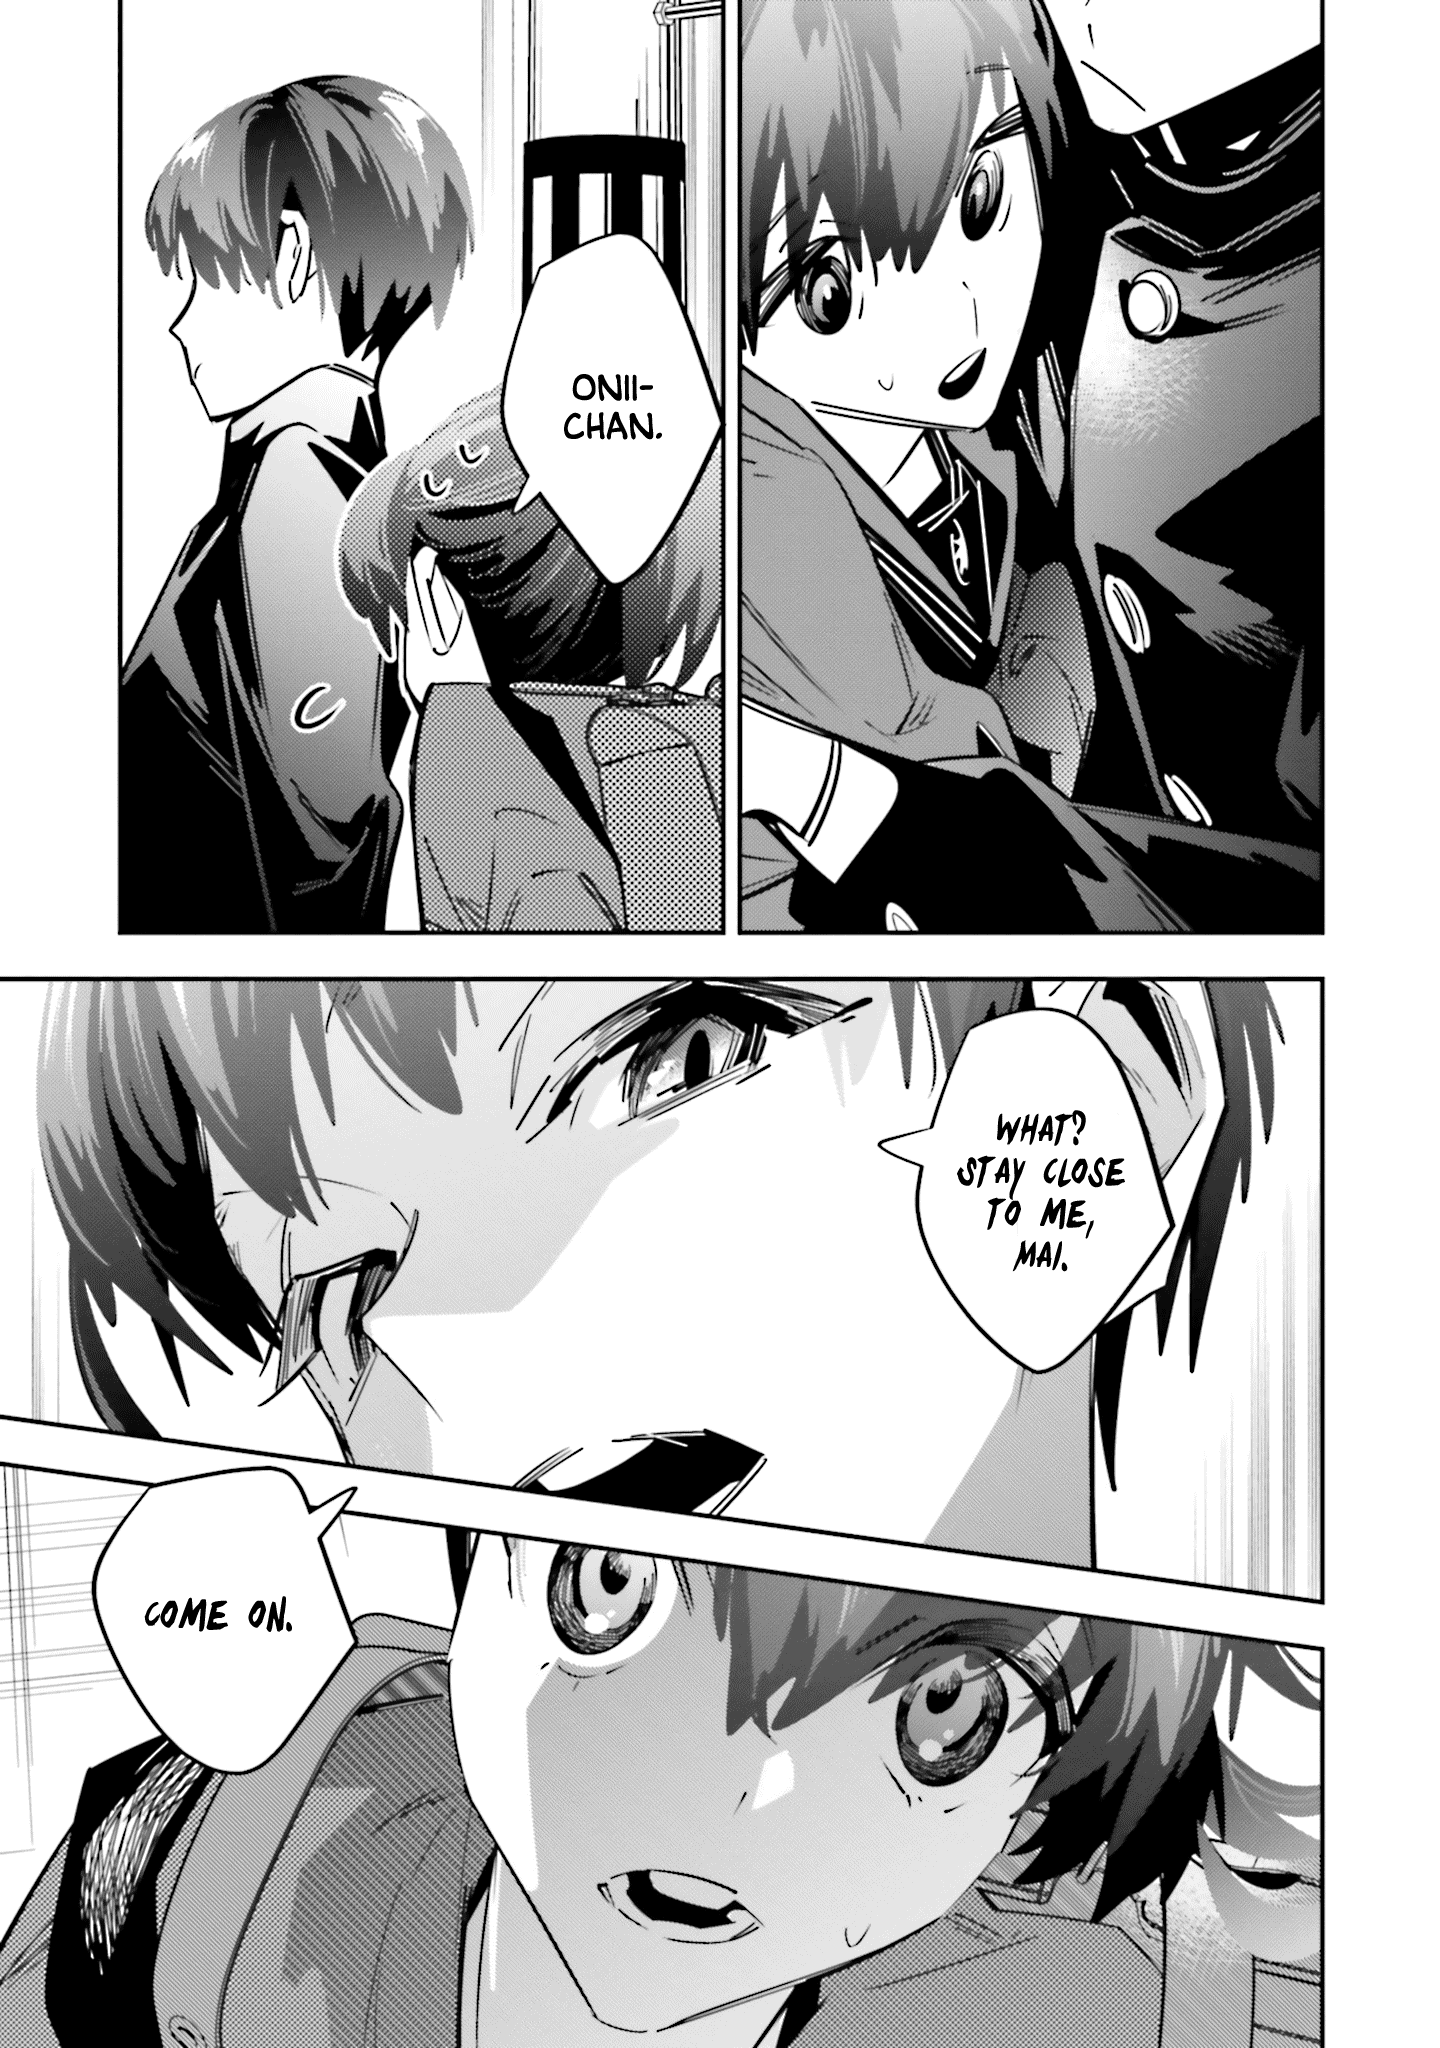 I Reincarnated As The Little Sister Of A Death Game Manga's Murder Mastermind And Failed Chapter 4 #30